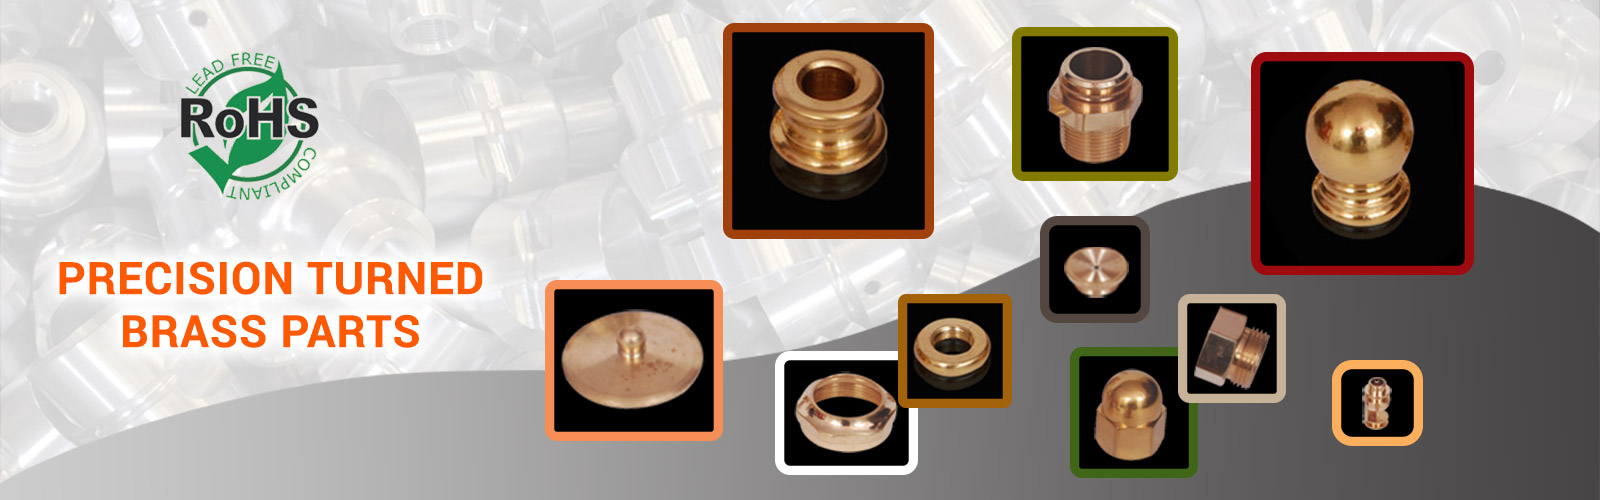 brass turned parts manufacturers